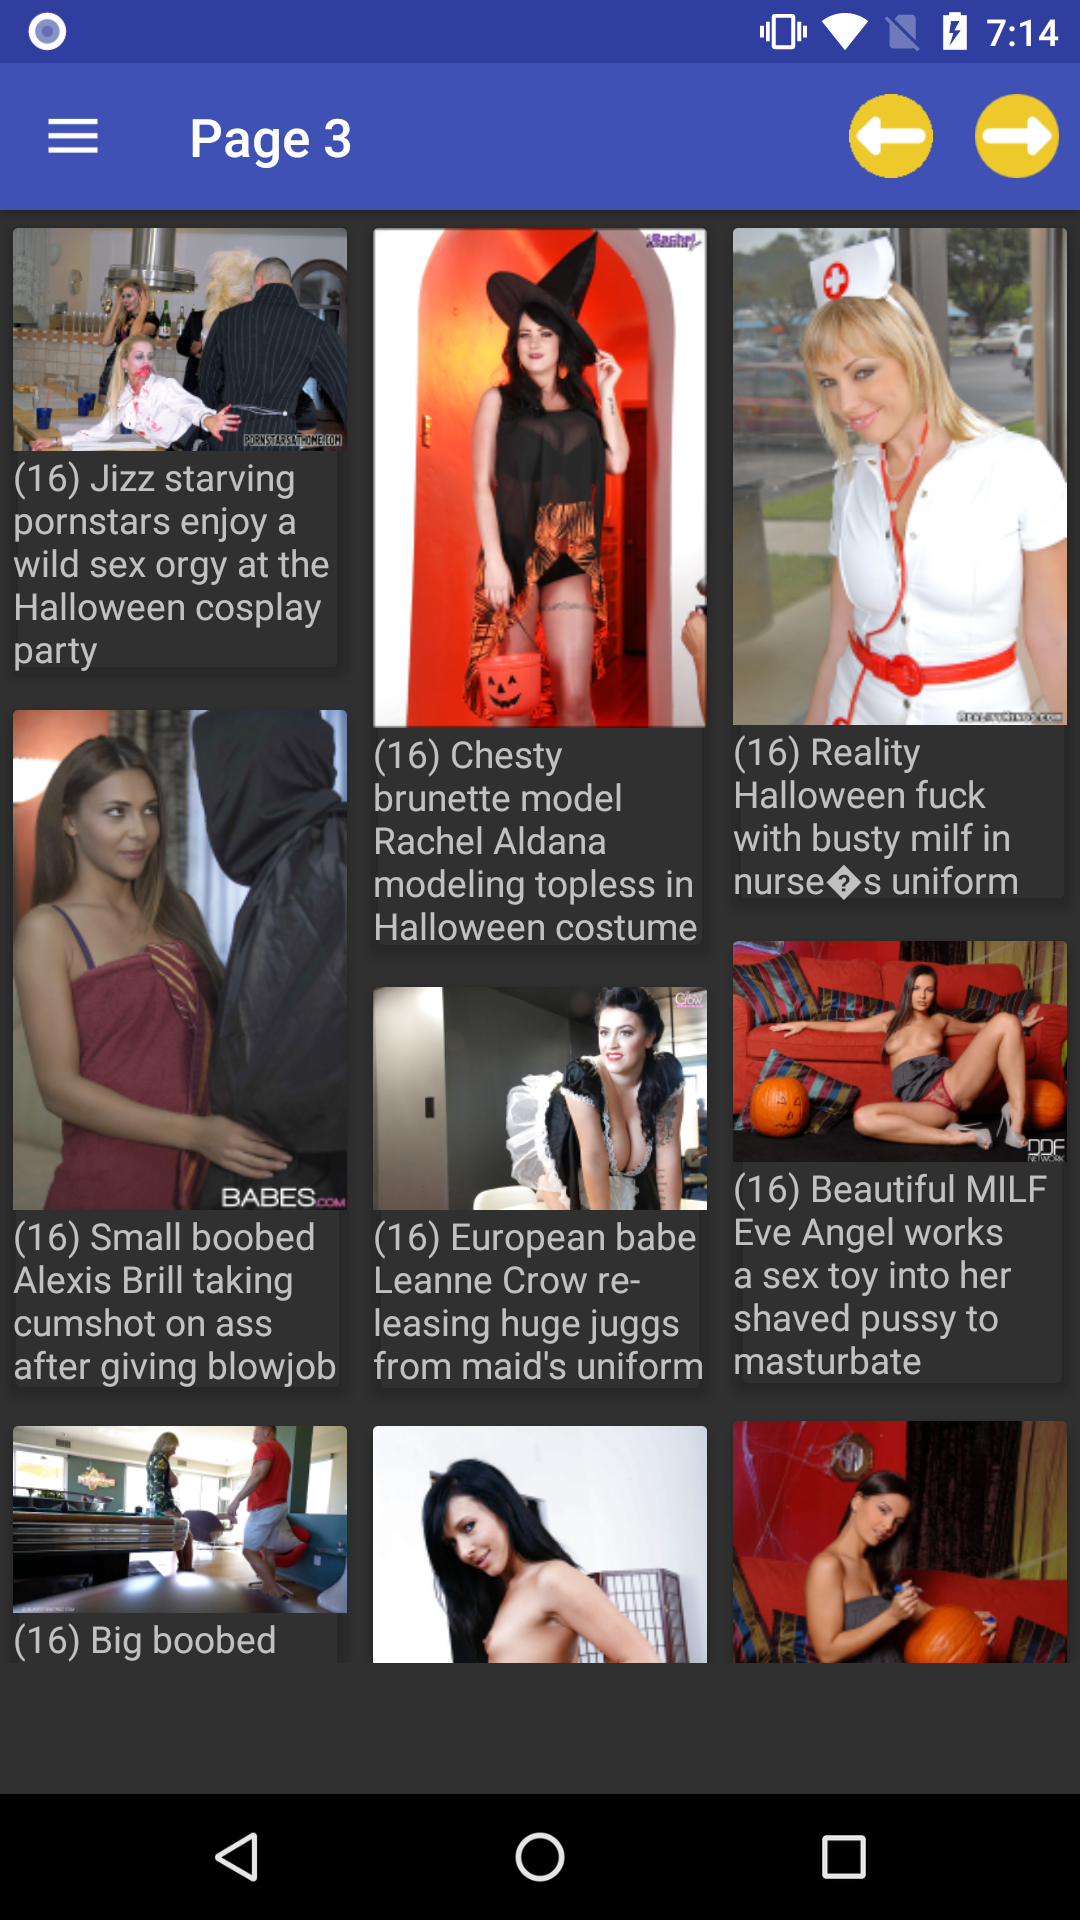 Halloween sexy galleries collection,photo,free,manga,collections,nhentai,apps,app,pornstar,picture,erotic,pornstars,porn,sexy,gallery,halloween,hentai,hentia,pic,android,adult,hebtai,amateur,download,play,best,galleries